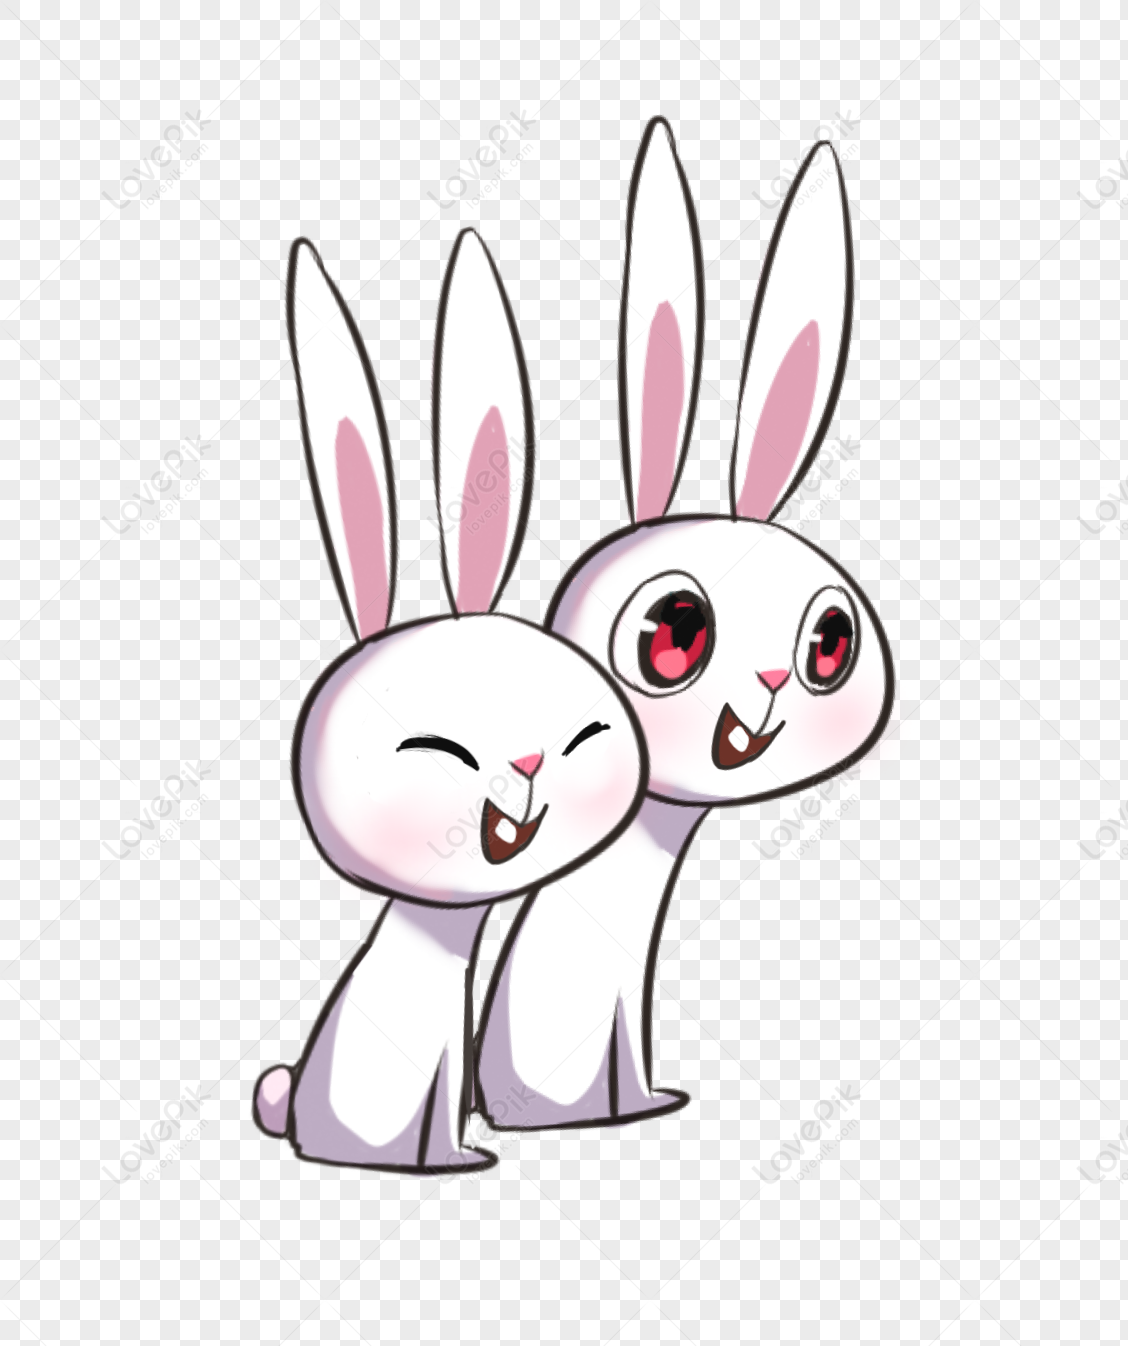 Rabbit PNG Transparent Background And Clipart Image For Free Download ...